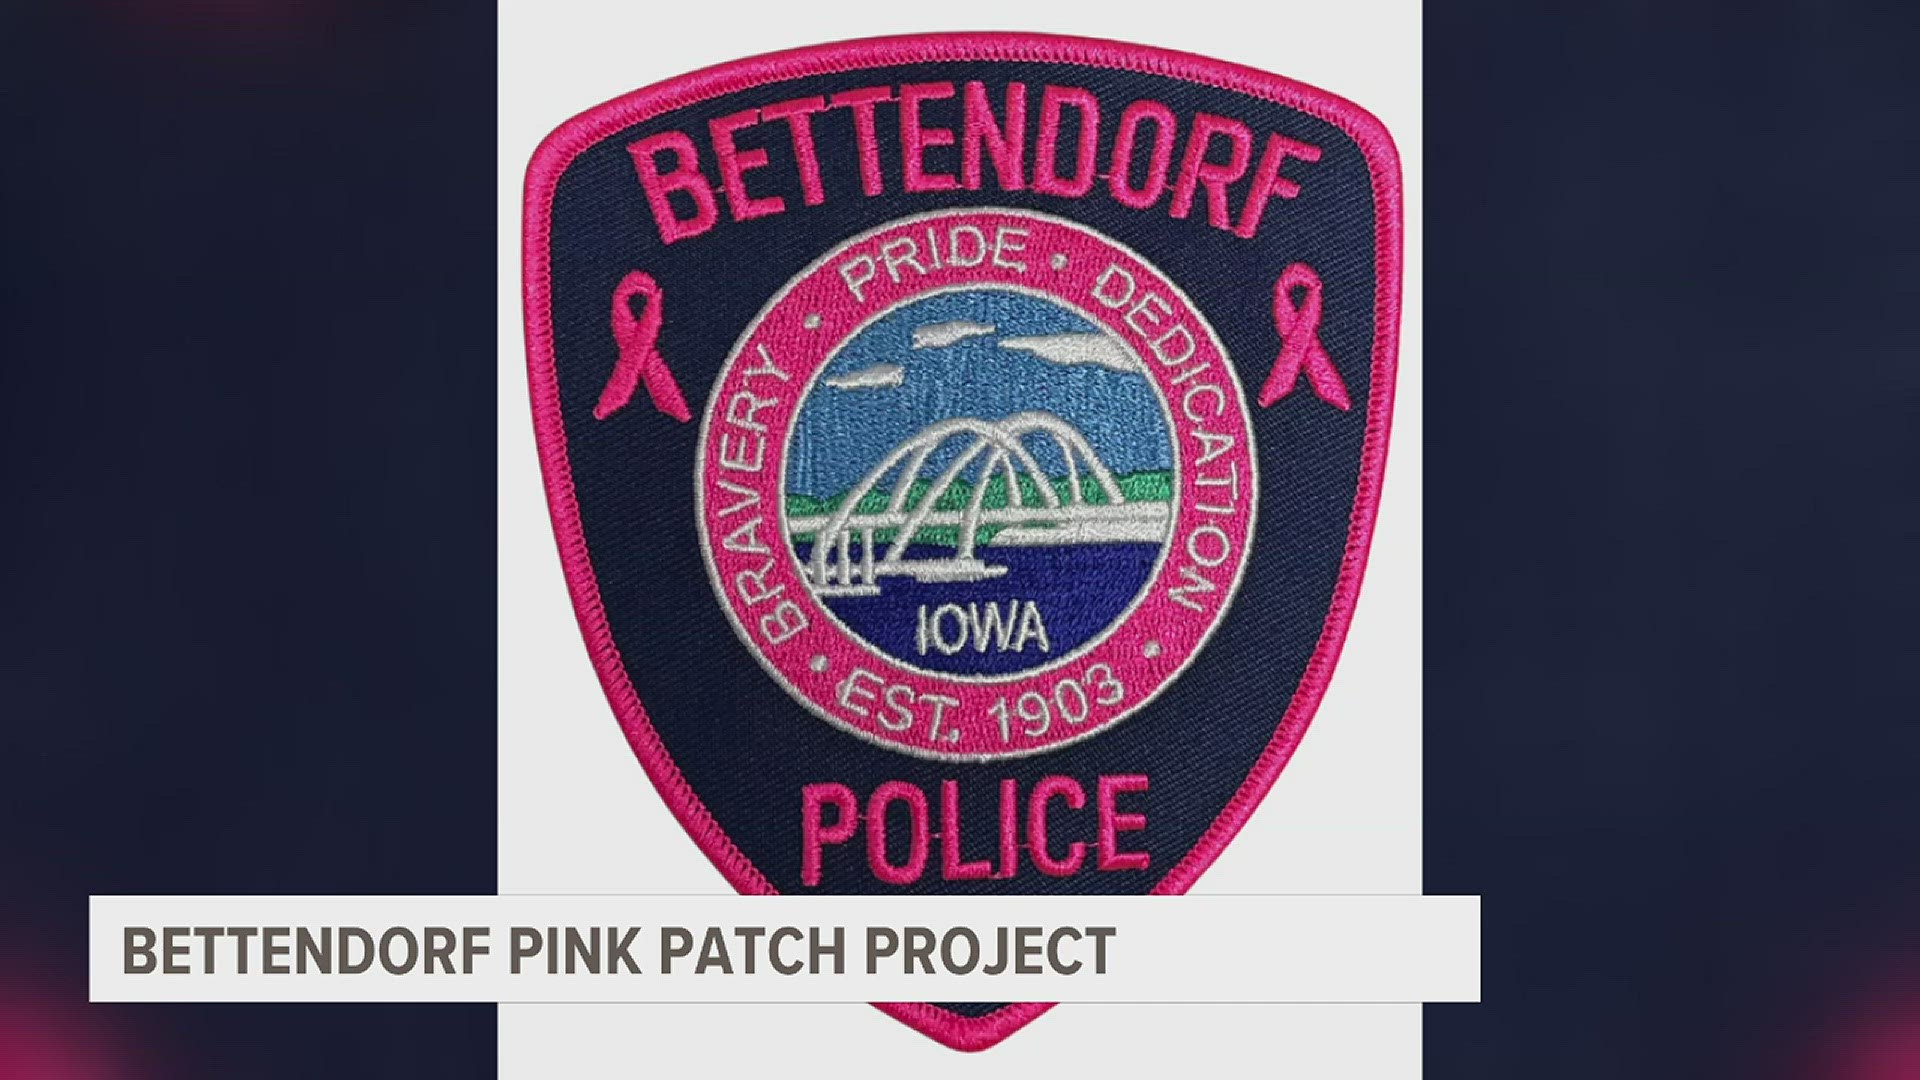 For five years Bettendorf police have been going pink in honor of breast cancer awareness month. The department is selling patches to help fund cancer research.